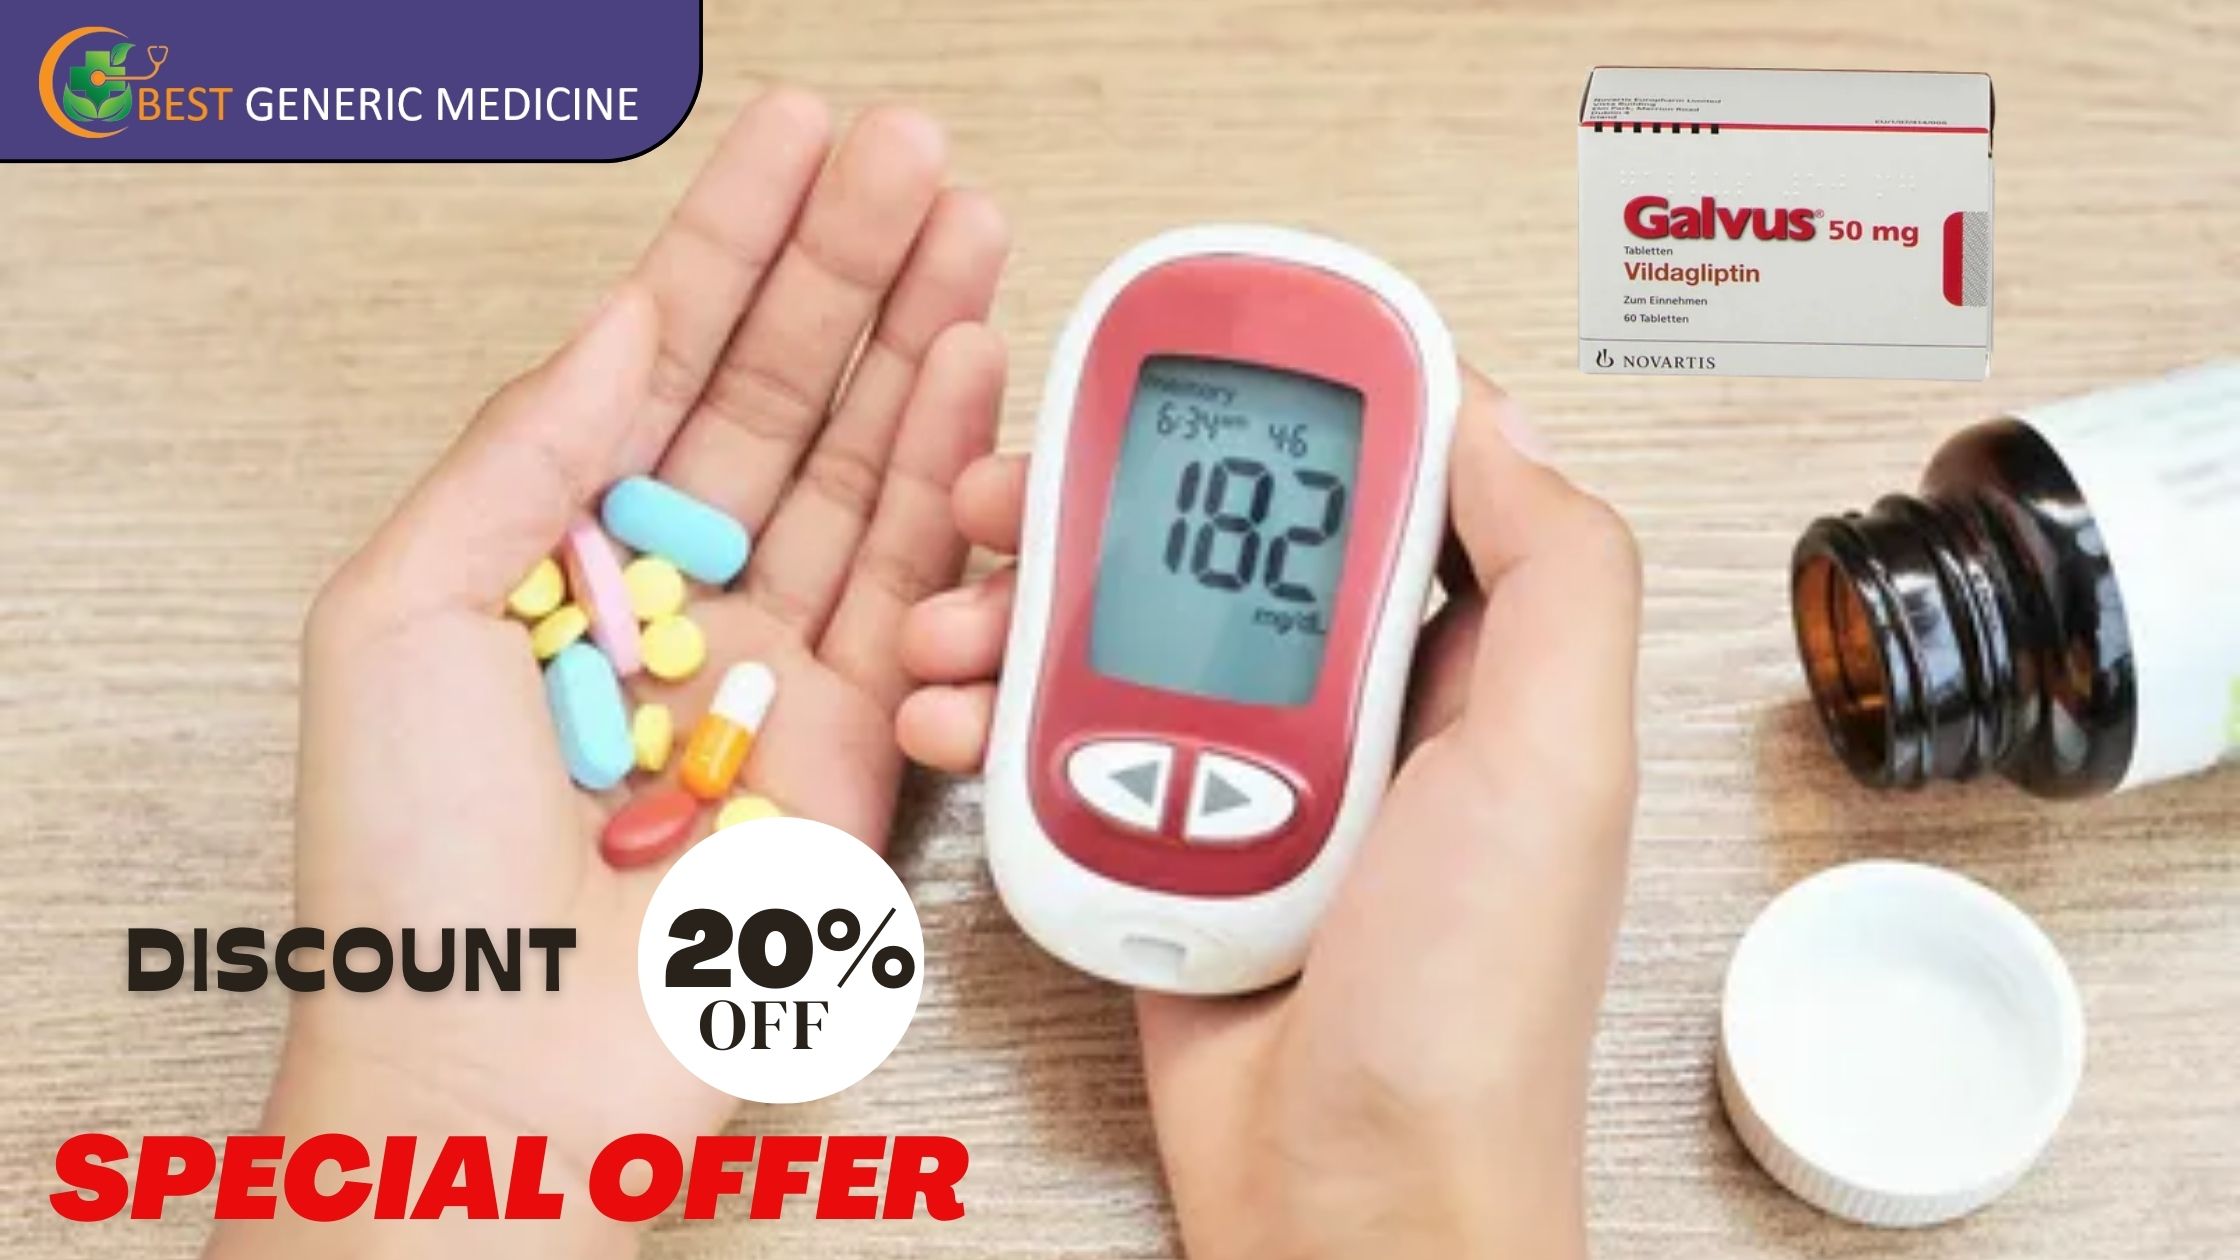 oy
~e BEST GENERIC MEDICINE

oy
,

20%
DISCOUNT 20 os

SPECIAL OFFER

  
  
 
 

 

- r
ave
~ £5 ‘